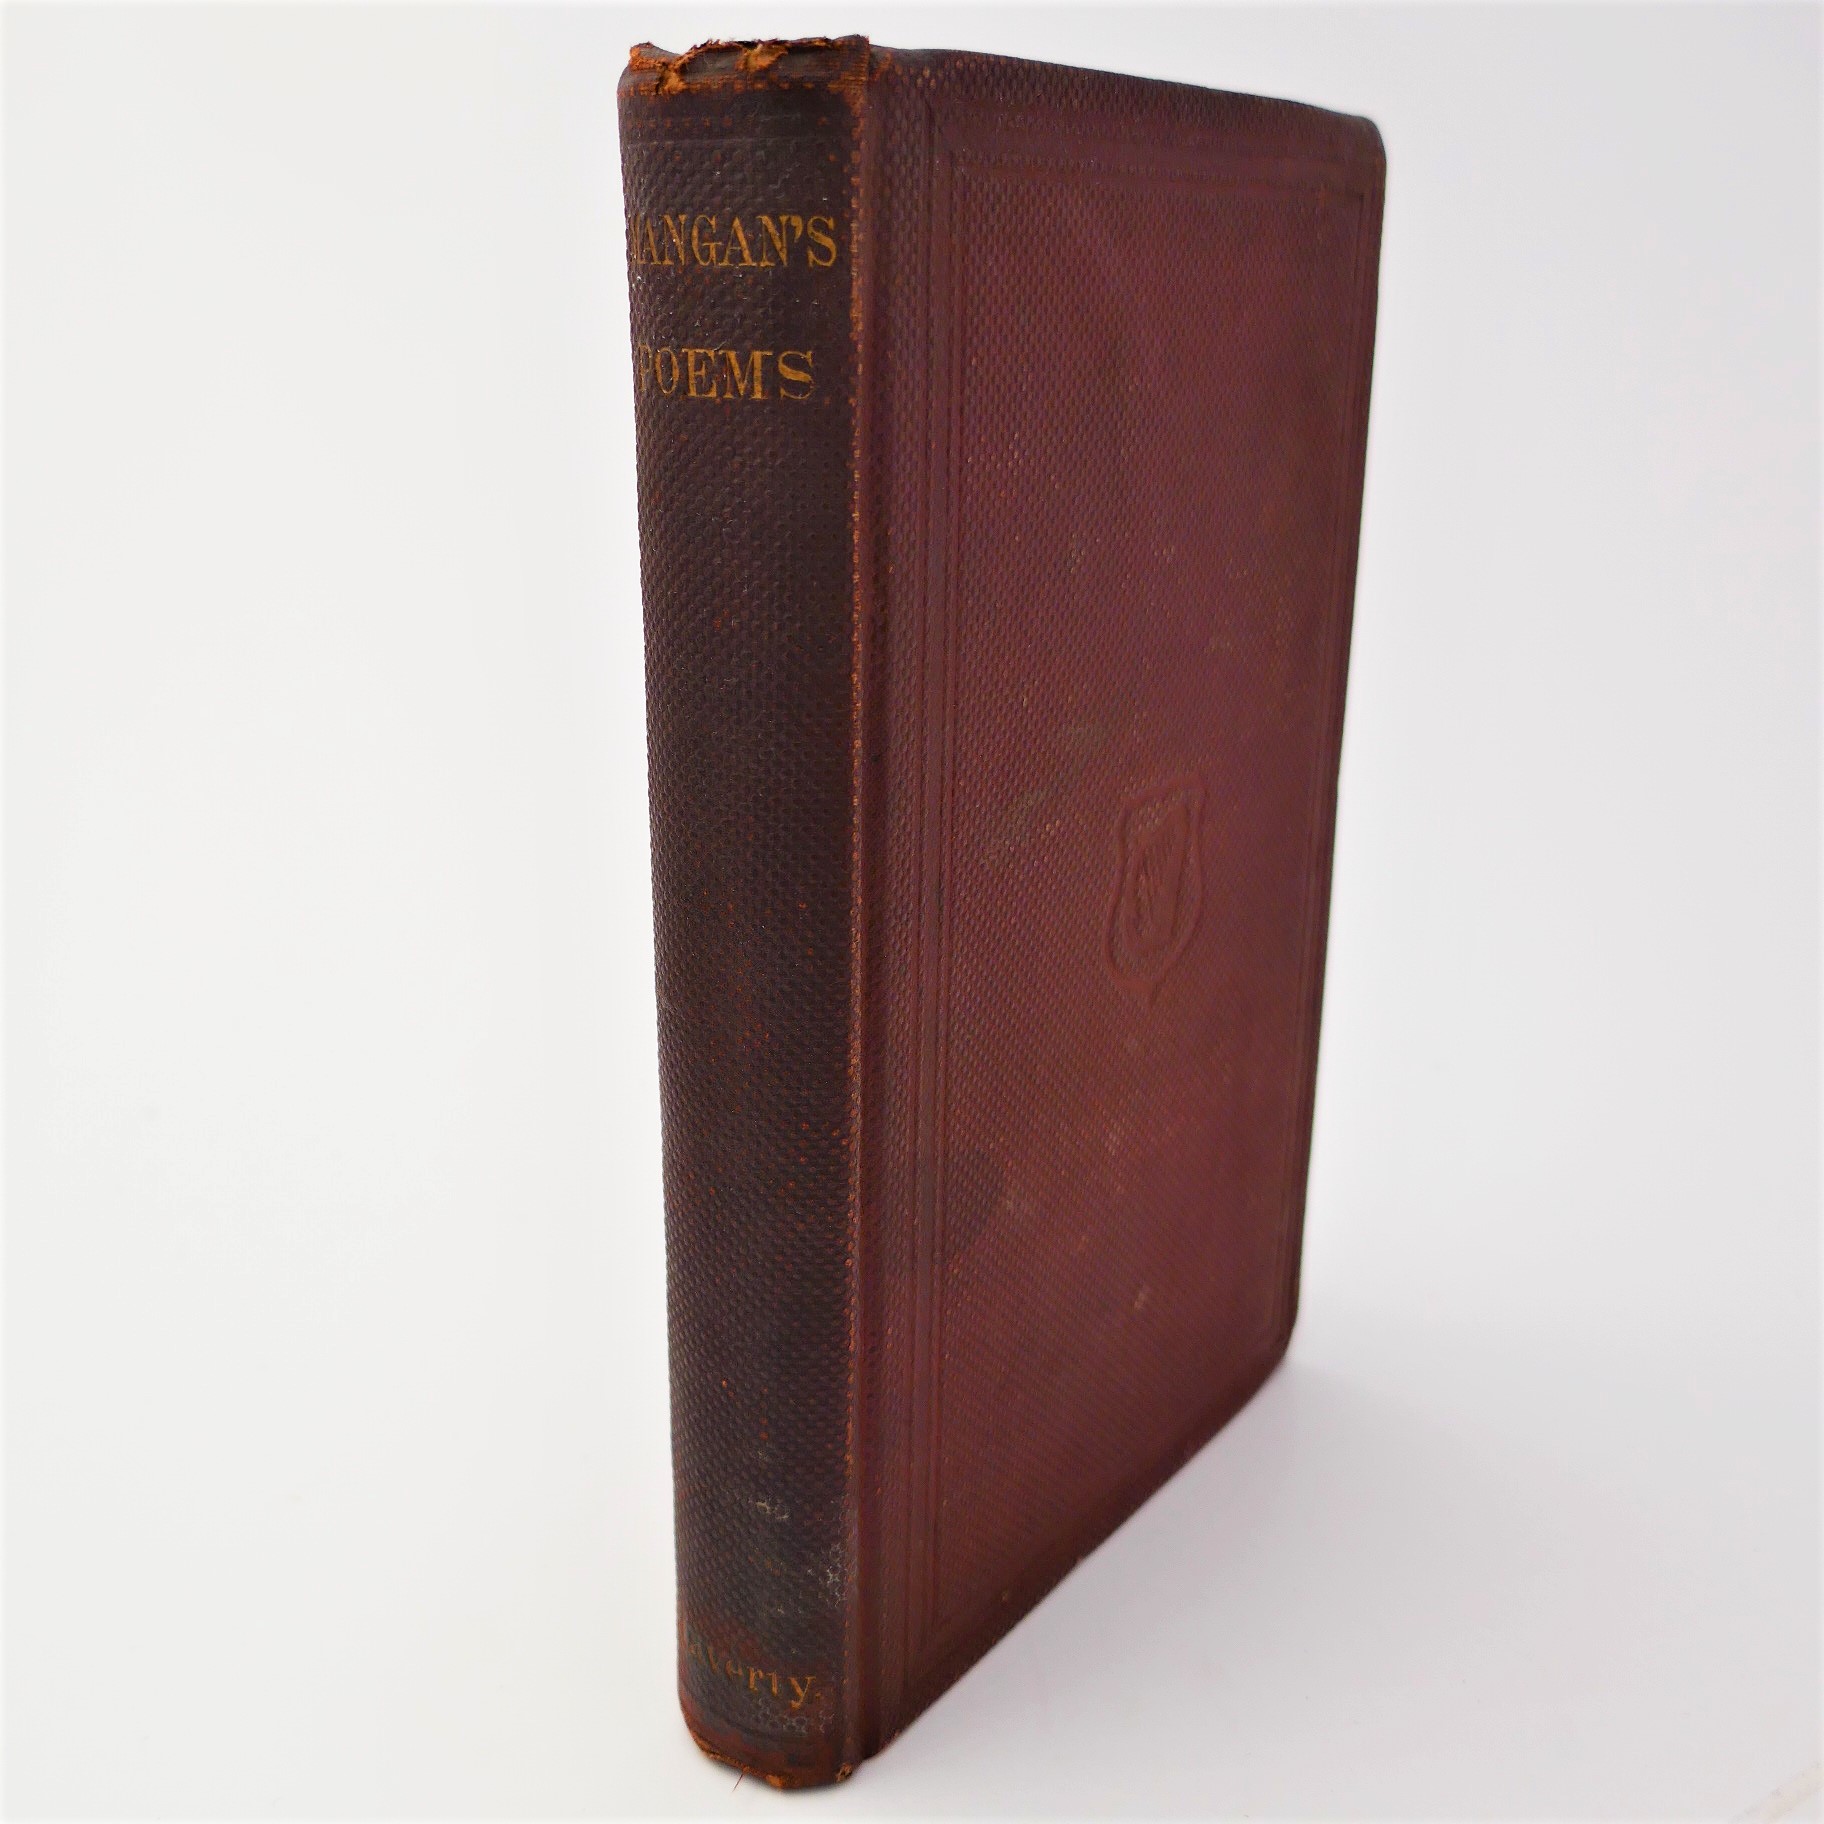 Poems of James Clarence Mangan. Introduction by John Mitchell (1859) by James Clarence Mangan